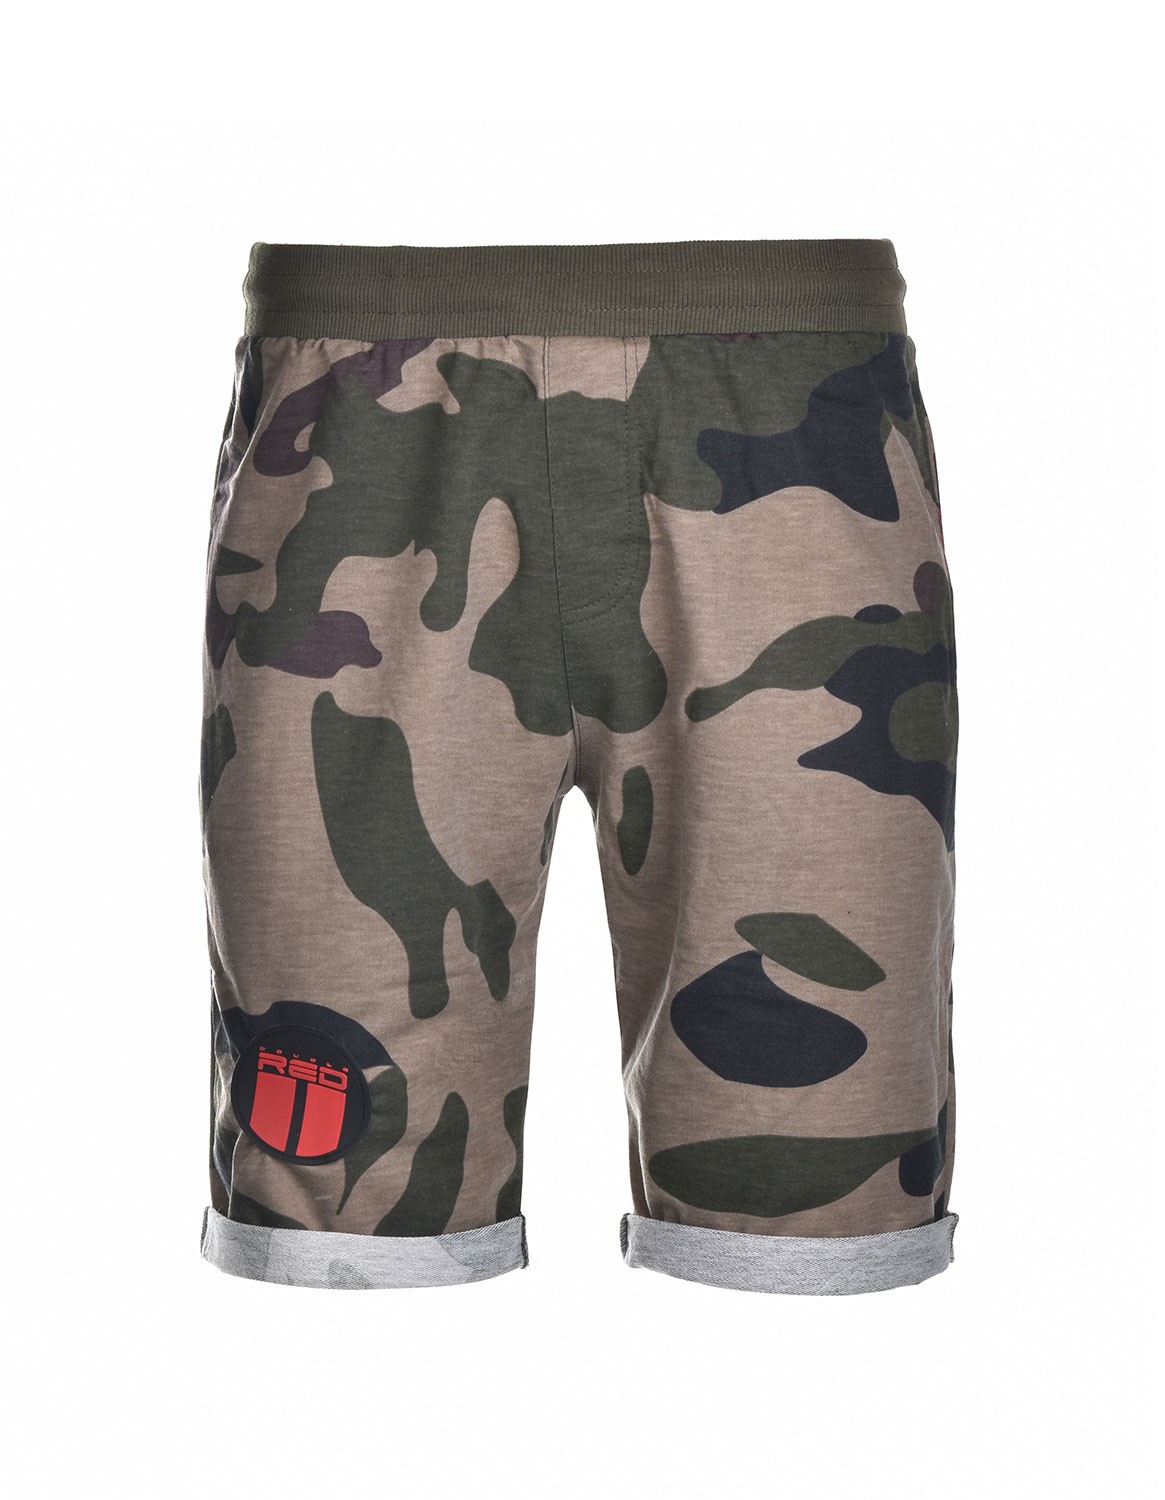 SOLDIER Shorts Green Camo